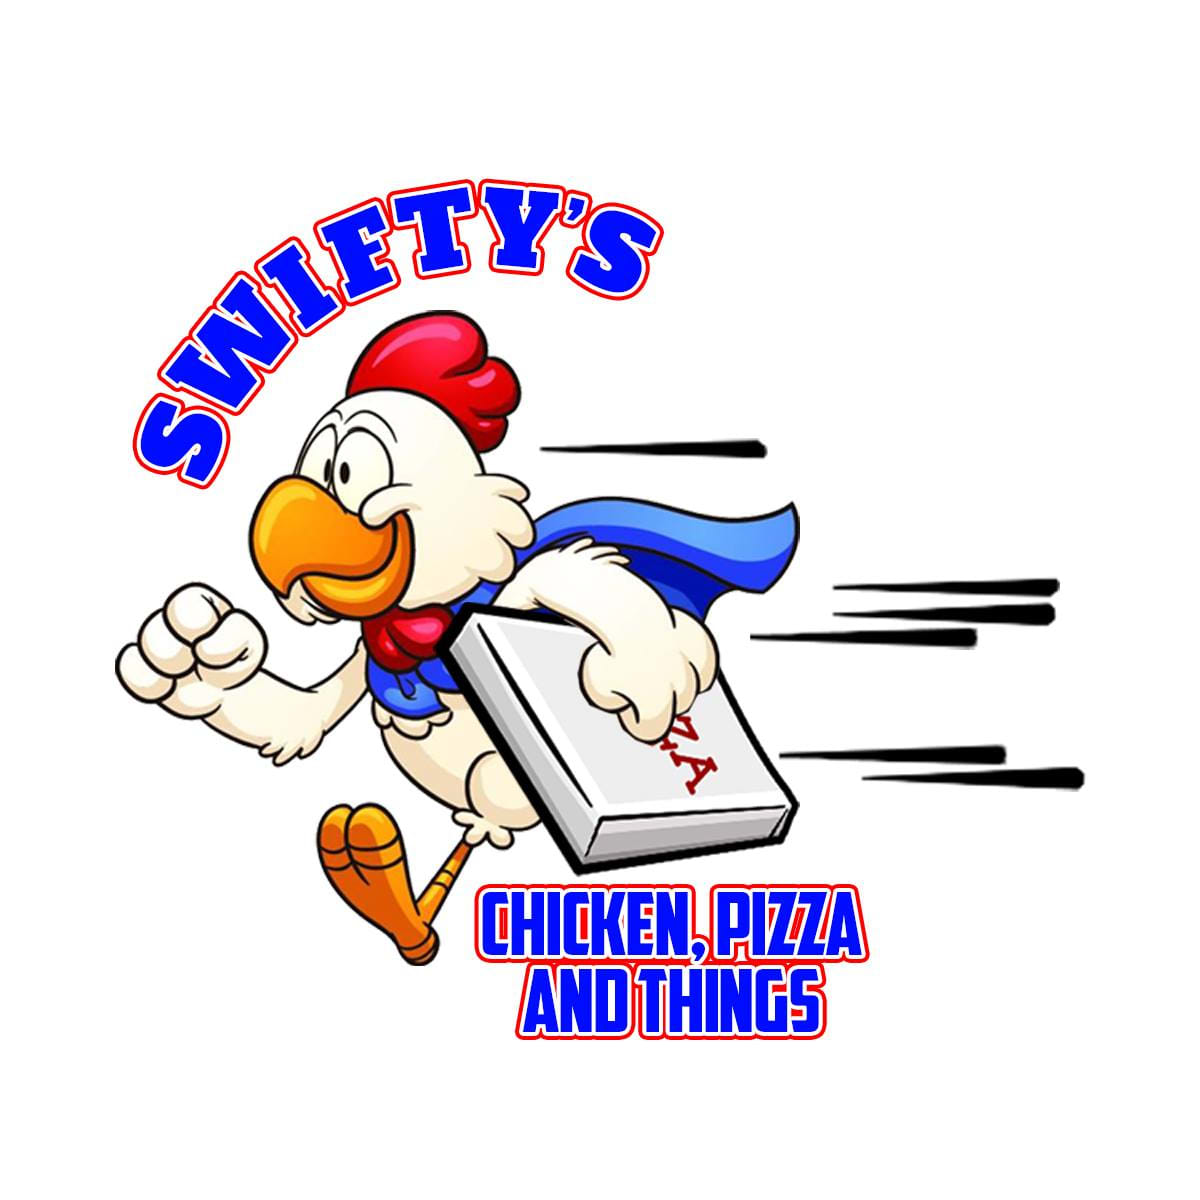 Swifty's Chicken, Pizza, and Things